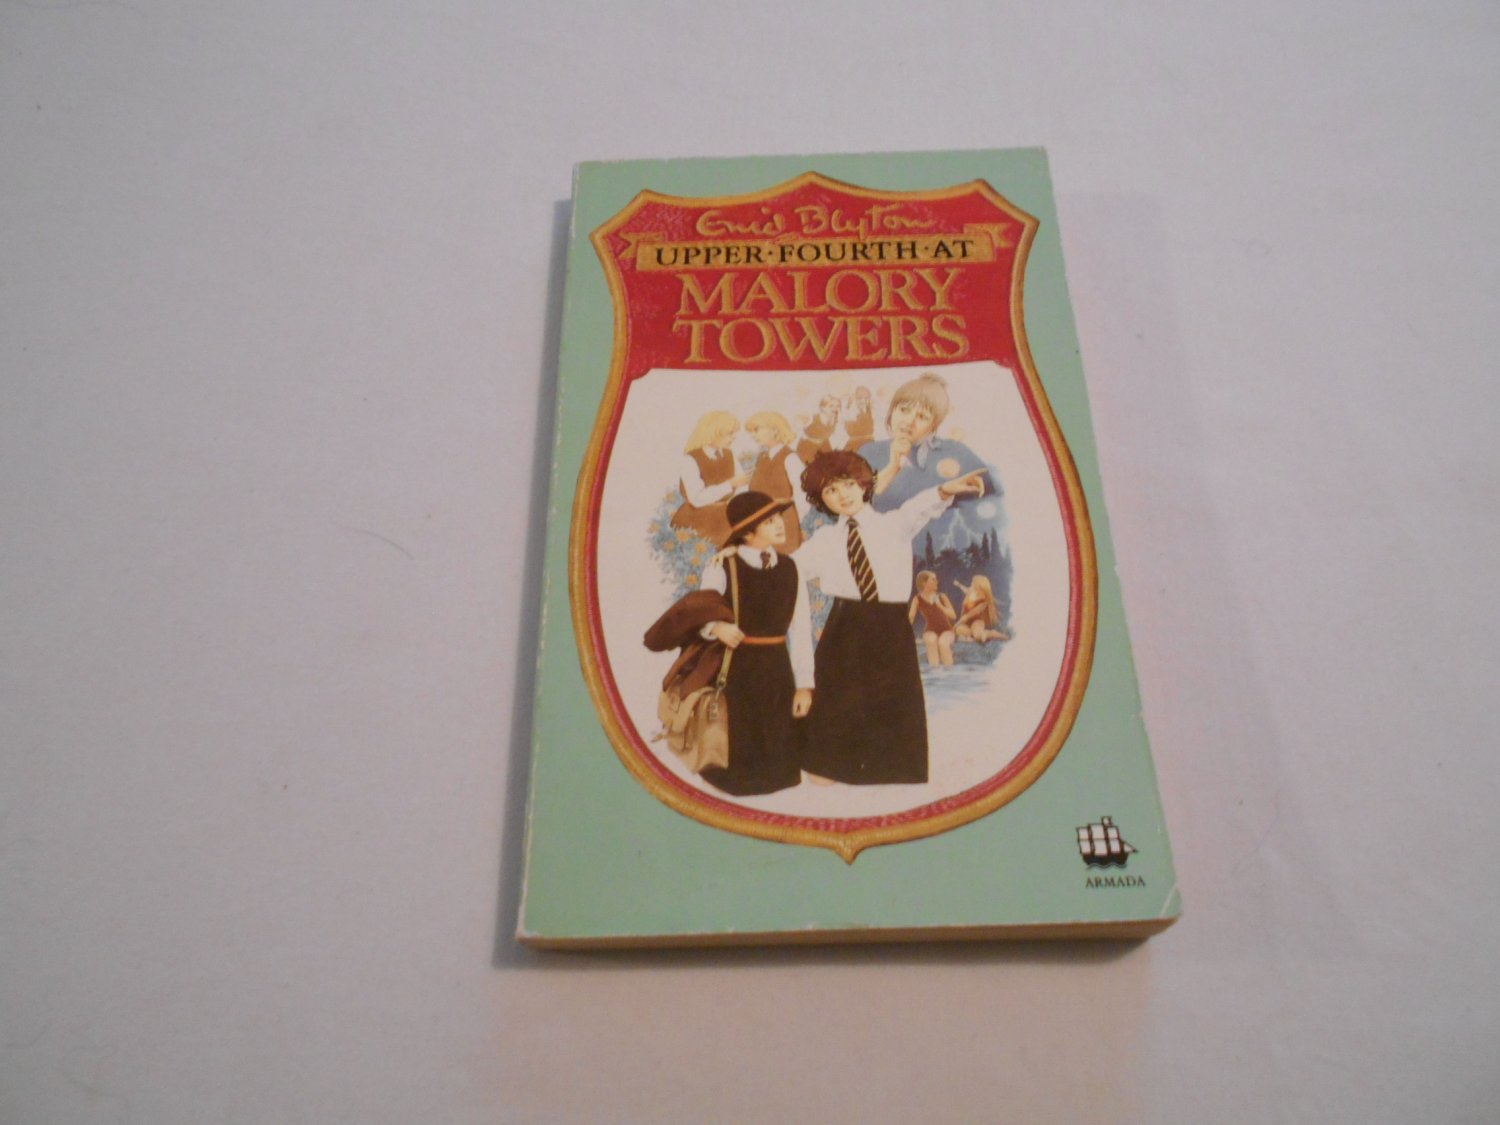 Upper Fourth At Malory Towers by Enid Blyton (1989) (B5) Malory Towers #4